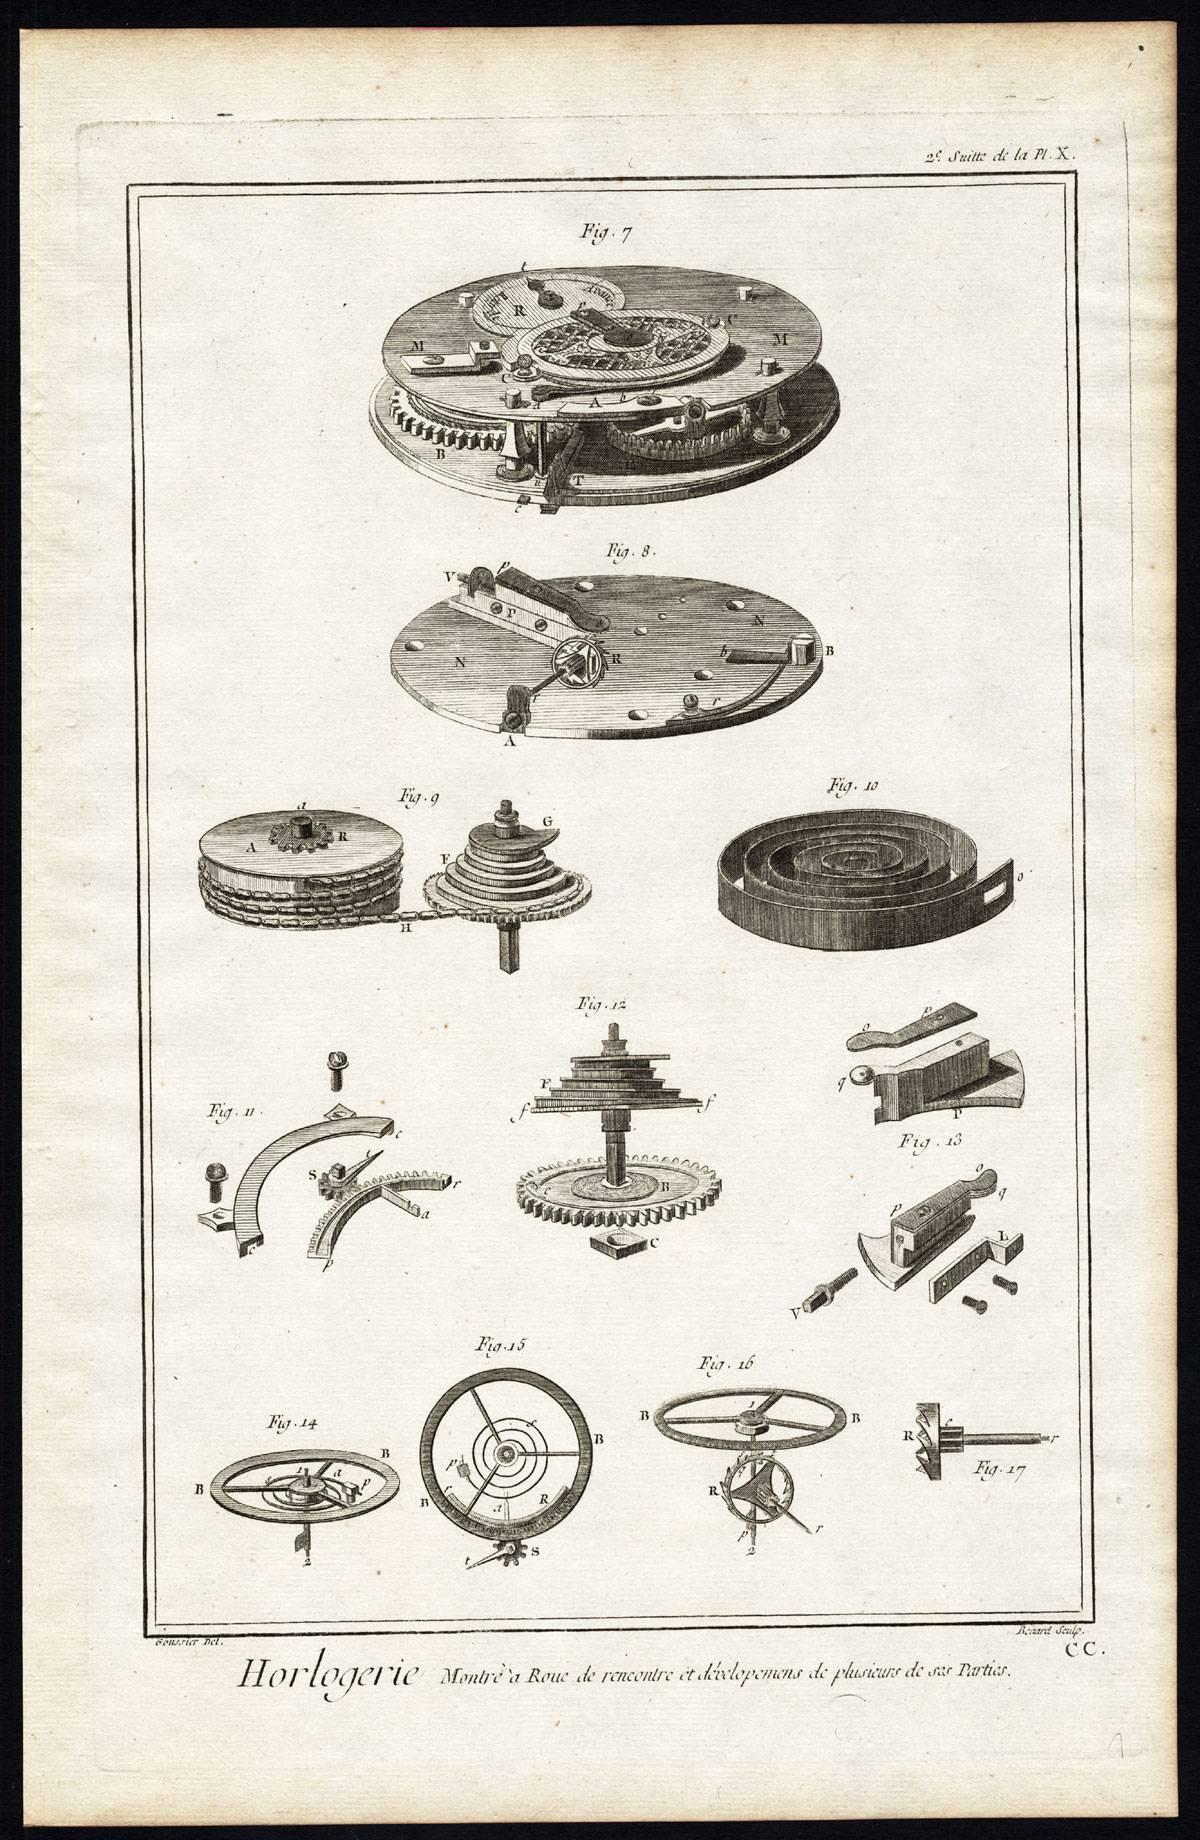 Copperplate engraving and etching on a verge type hand laid paper with watermark, not visible on every sheet.

This old antique print originates from: 'The Encyclopedie ou Dictionnaire raisonne des sciences, des arts et des metiers, par une Socie de